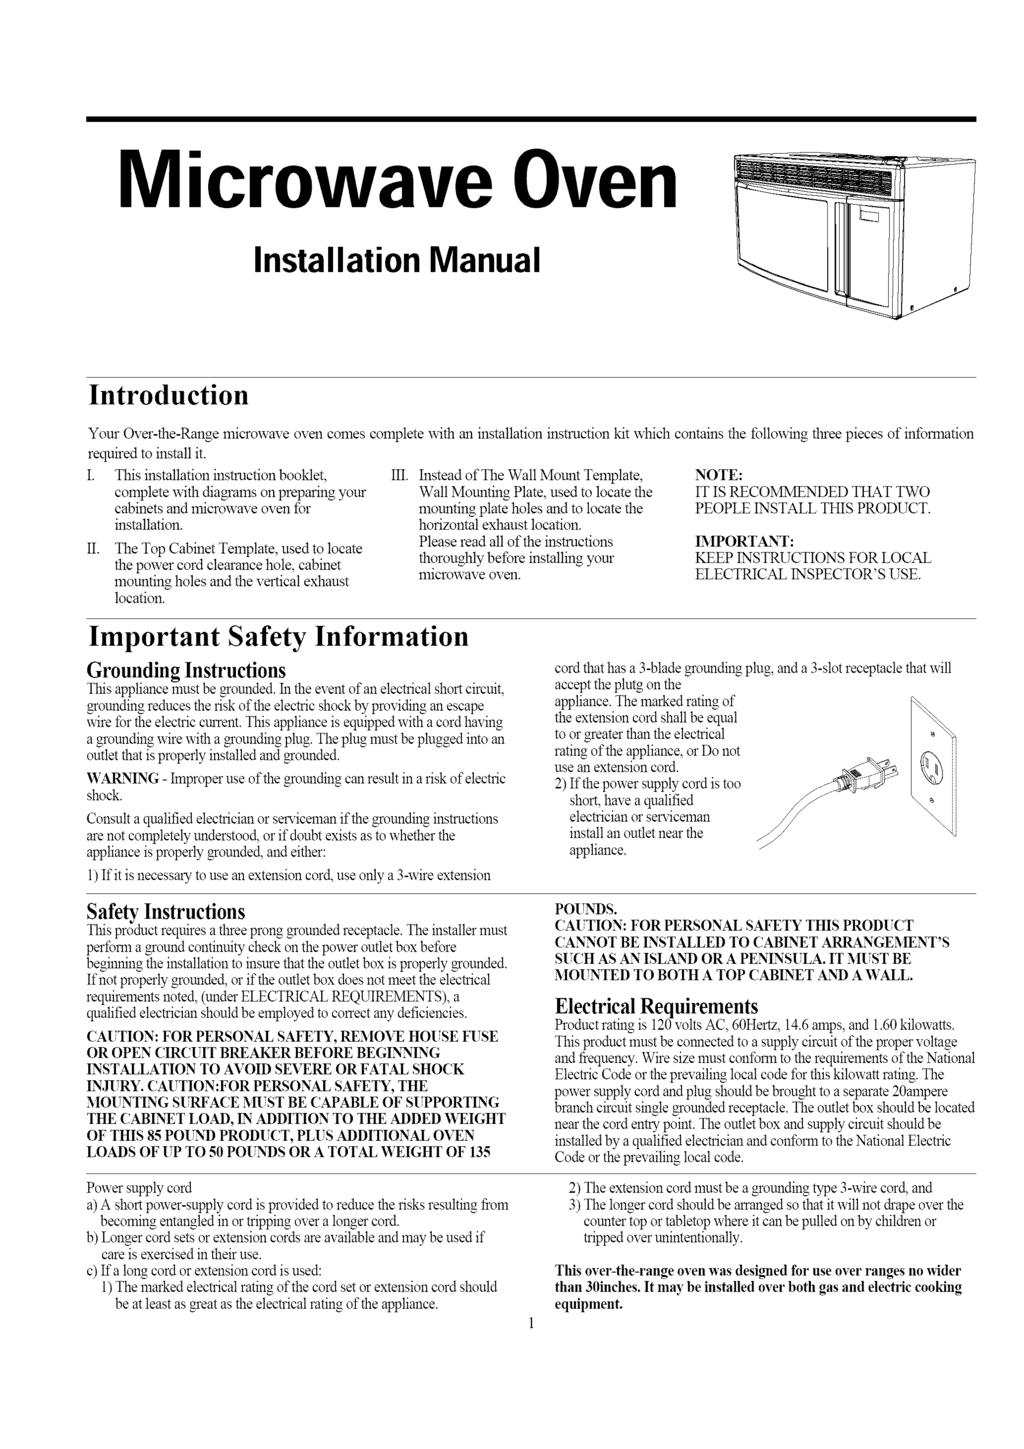 Microwave Oven Installation Manual Introduction Your Over-the-Range ruicrowave required to install it. I. This installation instruction booklet, complete with diagrams on prepaxing yonr cabinets and microwave oven for installation.